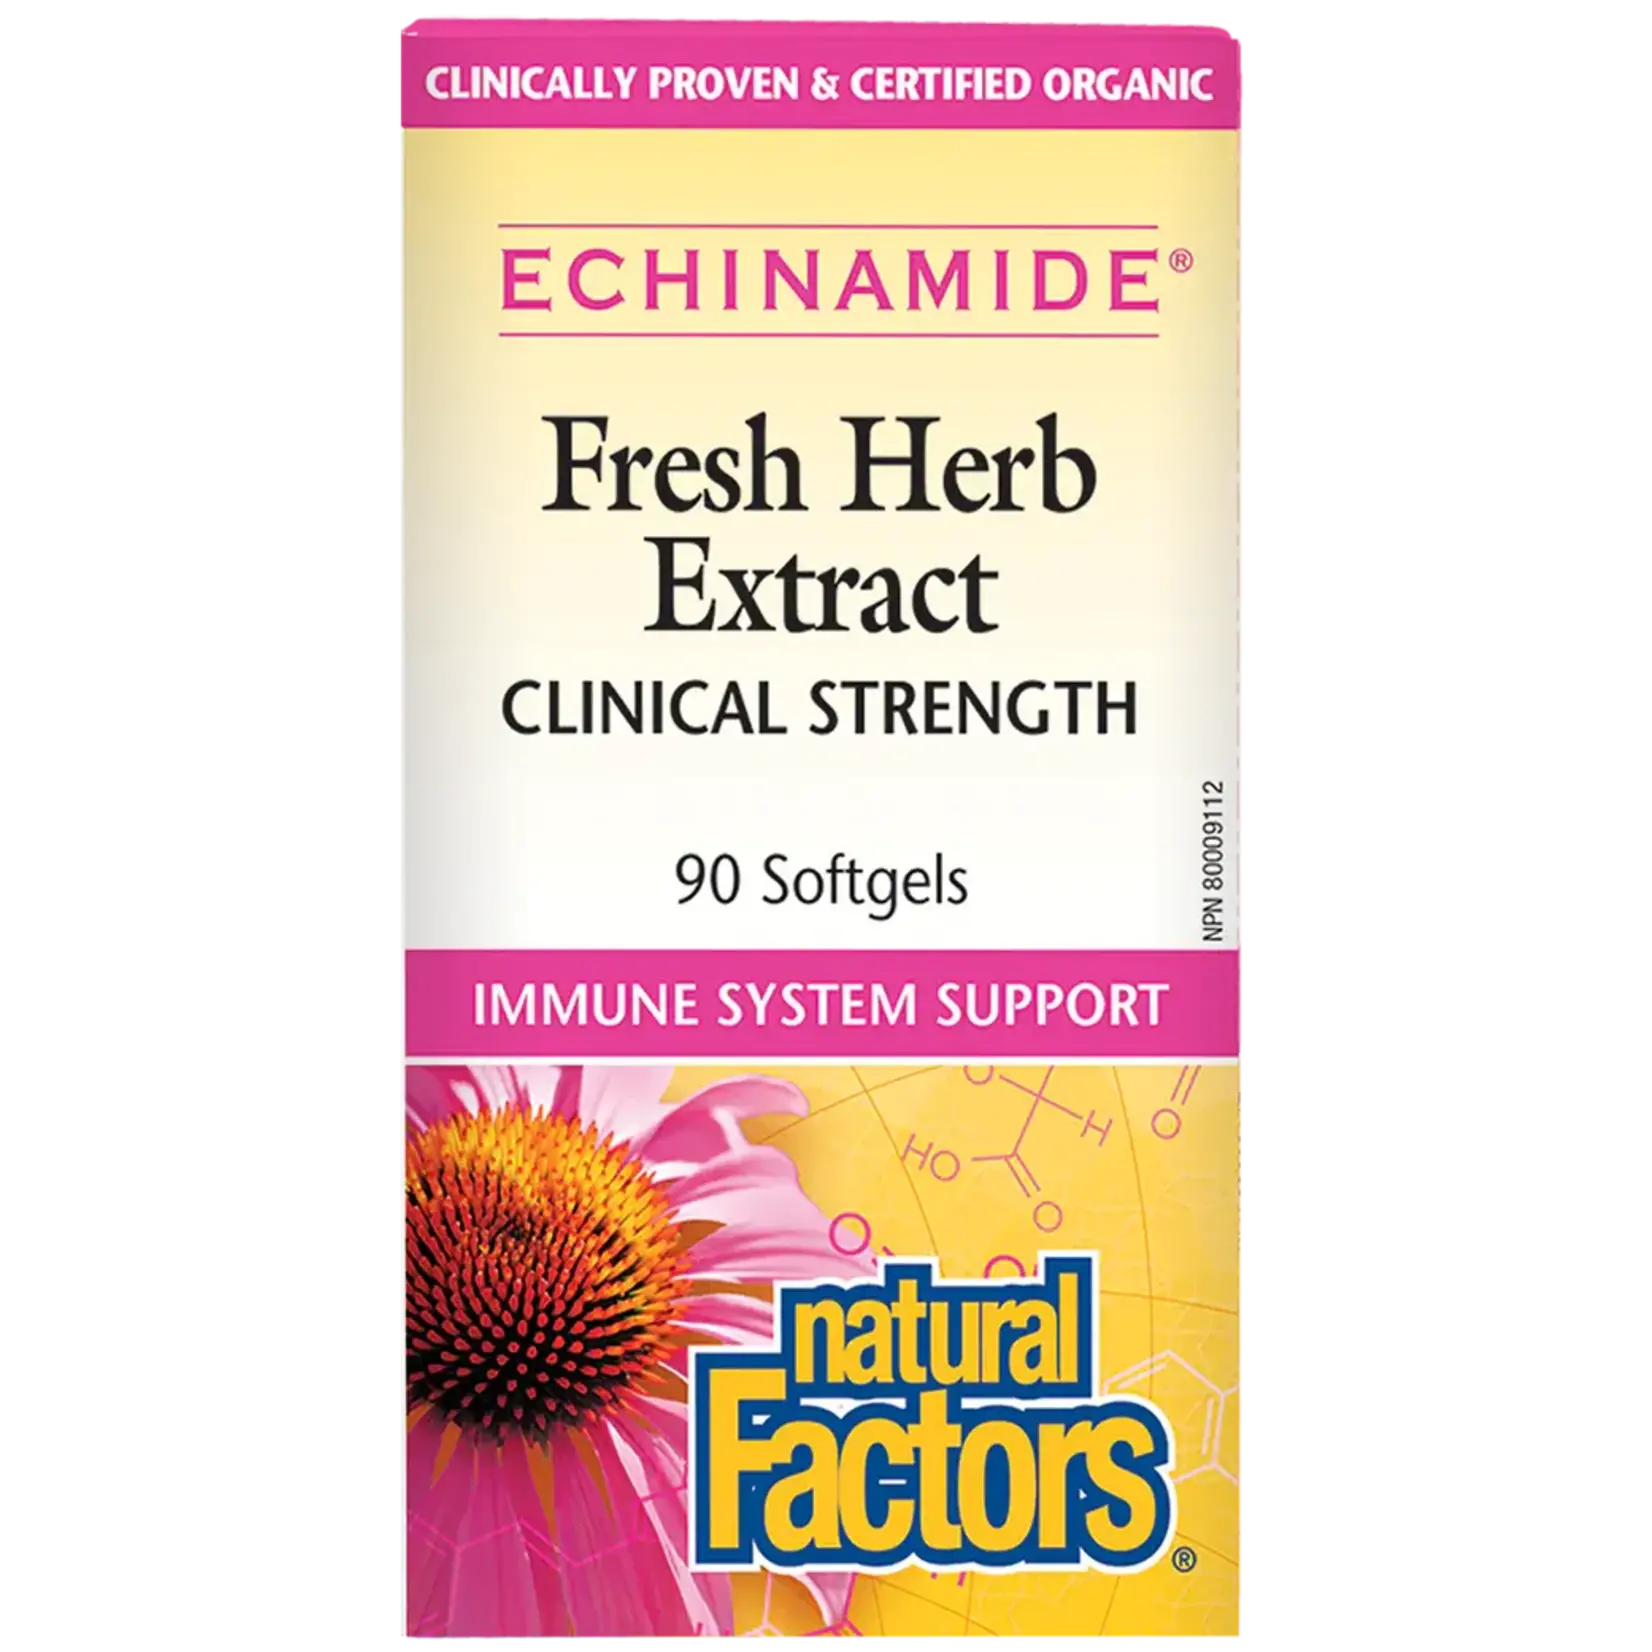 NATURAL FACTORS NATURAL FACTORS ECHINAMIDE ANTI-COLD FRESH HERB EXTRACT (CLINICAL STRENGTH) 90 SOFTGELS